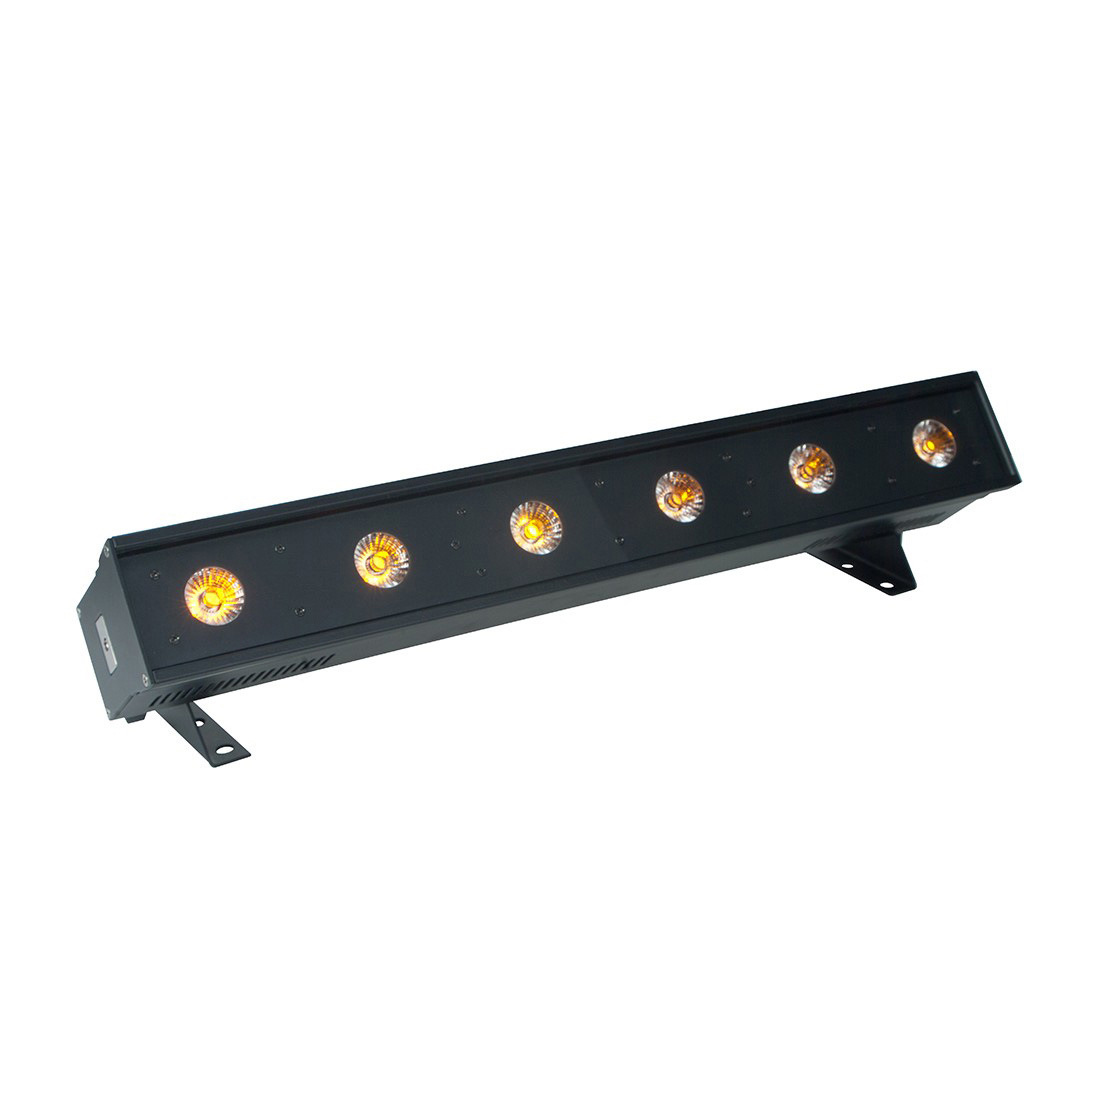 Picture of ADJ ULTRA HEX BAR 6 LED Linear Fixture with 6x 10W 6-in-1 HEX LEDs